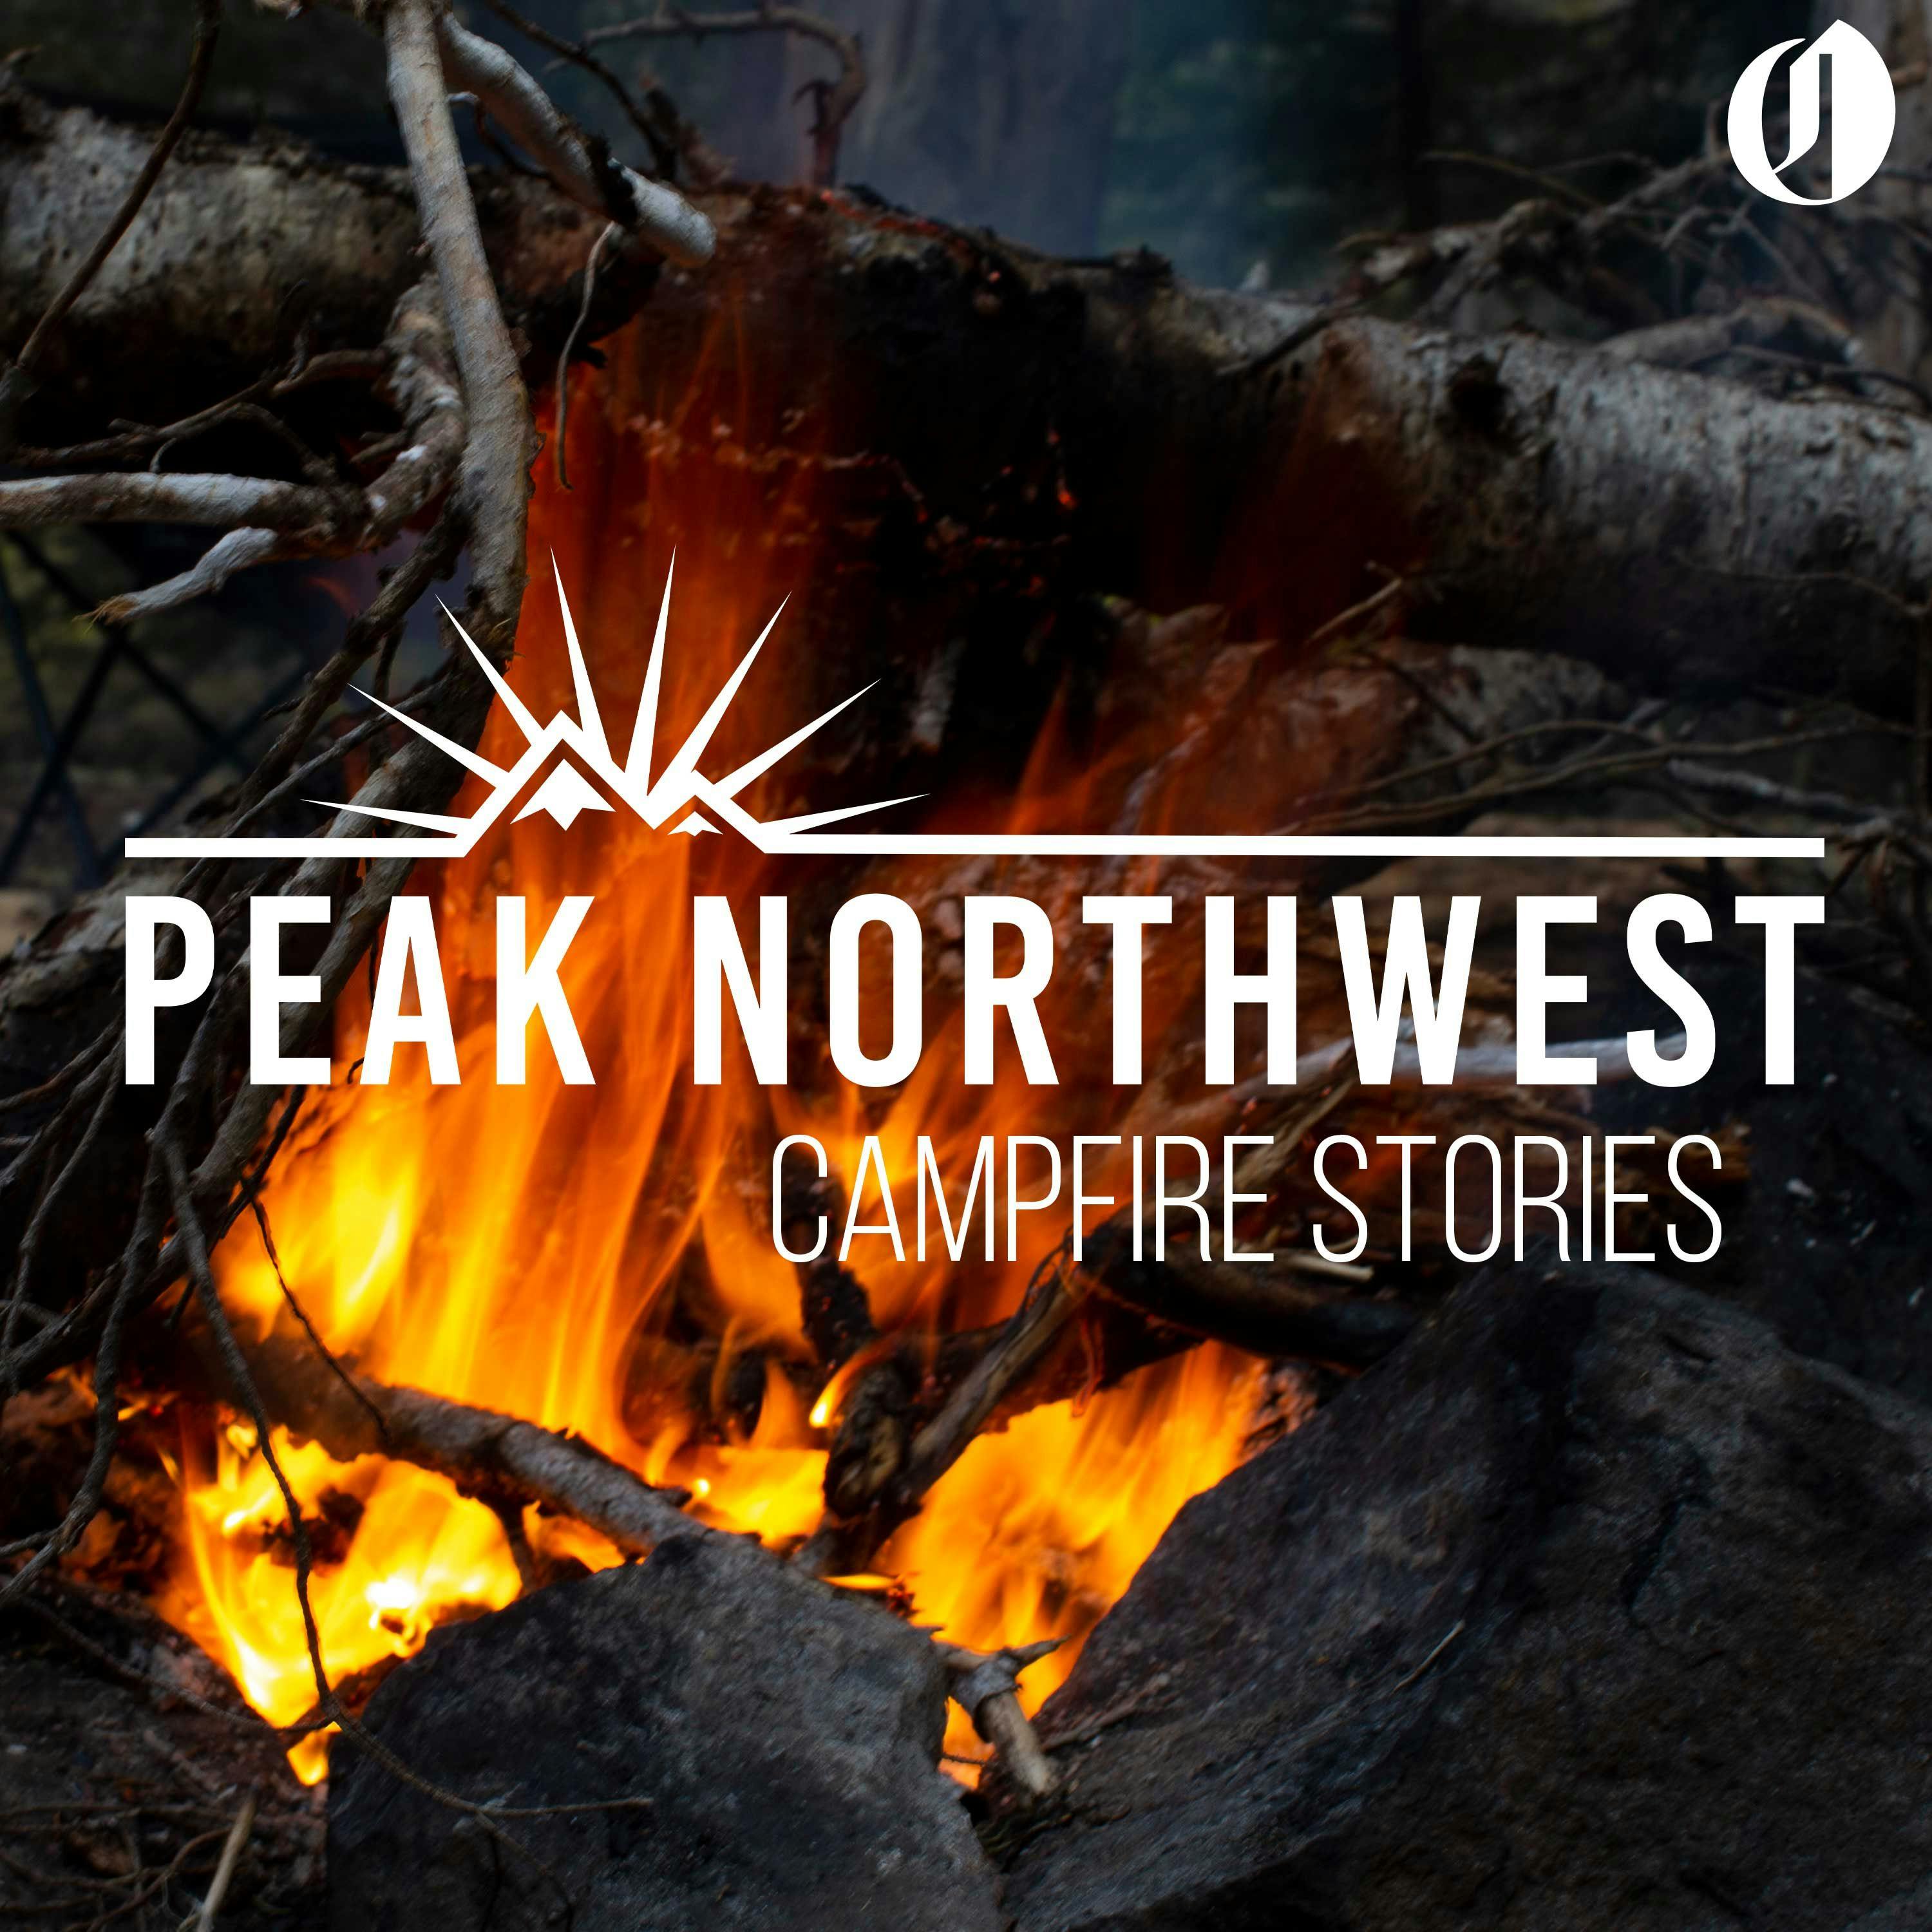 Campfire stories: Our unforgettable animal encounters